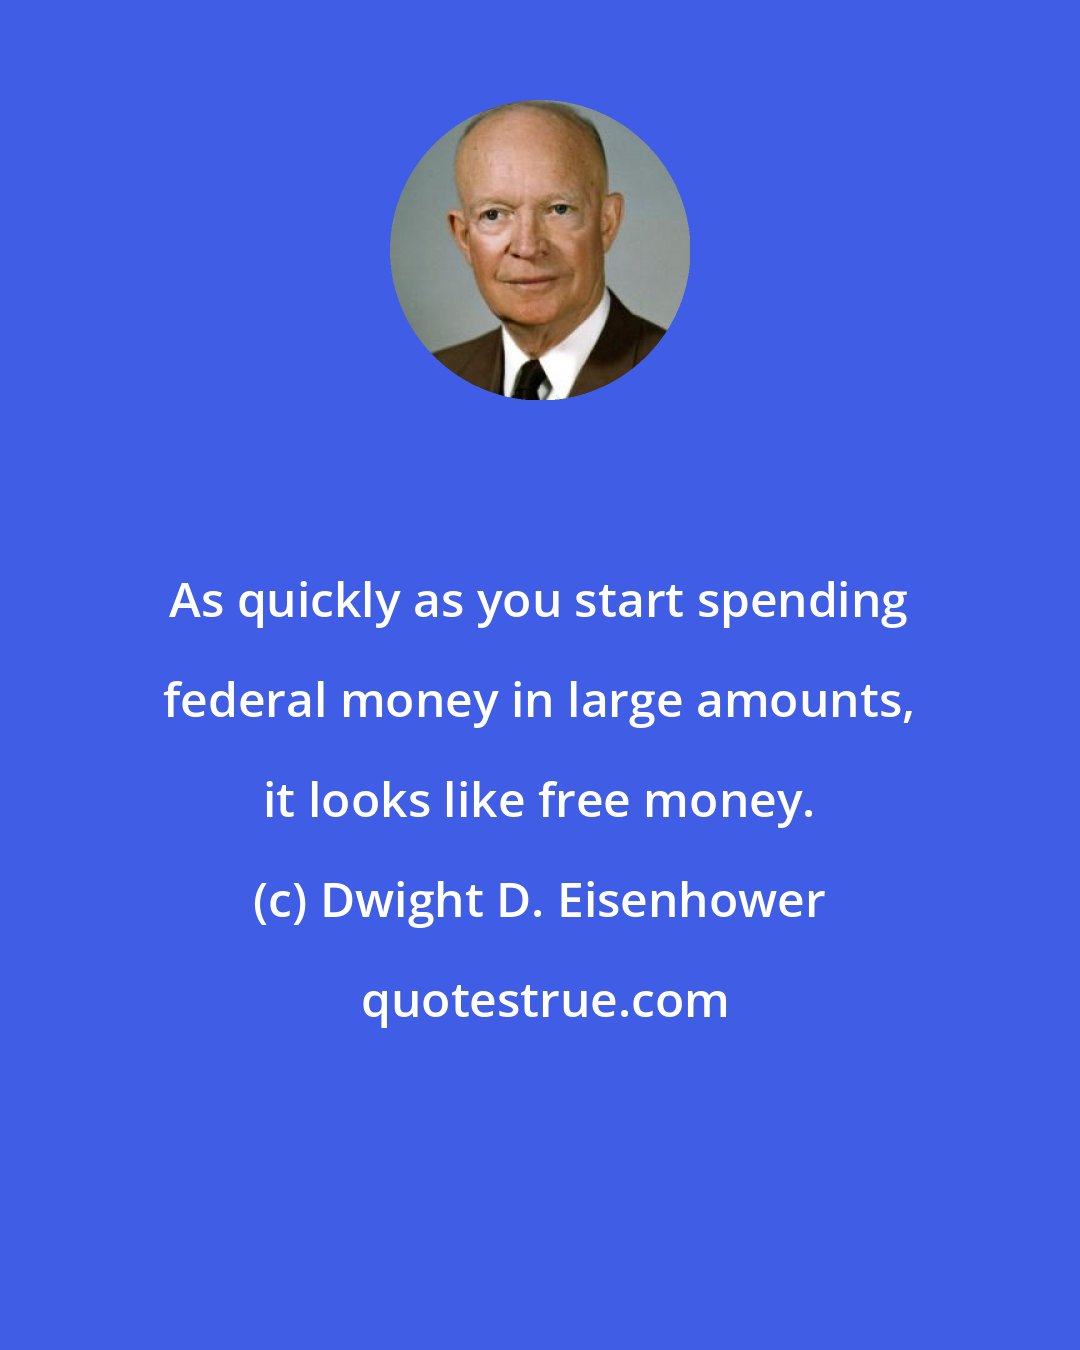 Dwight D. Eisenhower: As quickly as you start spending federal money in large amounts, it looks like free money.